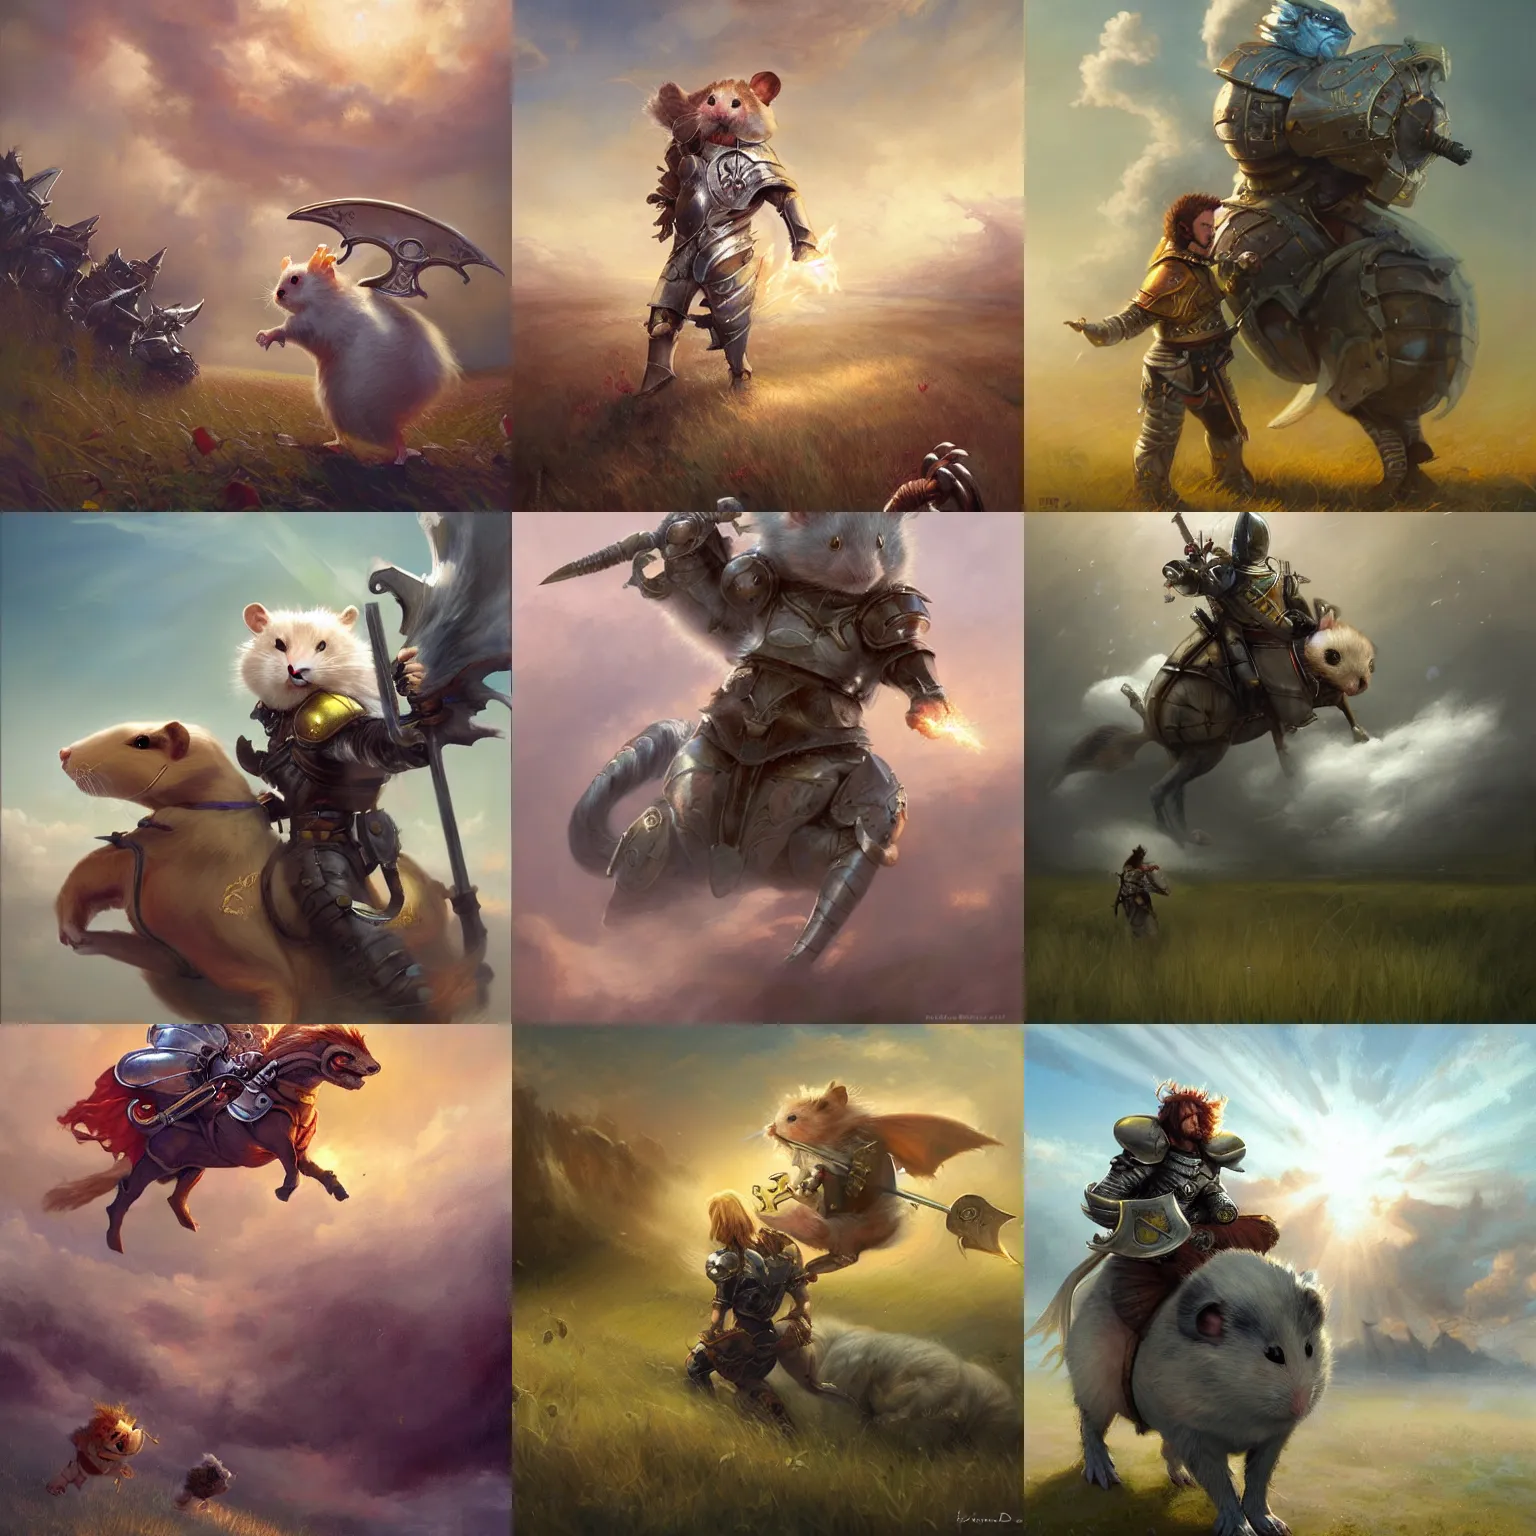 Prompt: Cloud Champion Hamster knight roaming the windswept field dave dorman edson campos christopher young jeff simpson allison carl hiro izawa paul chadeisson, epic fantasy, oil on canvas